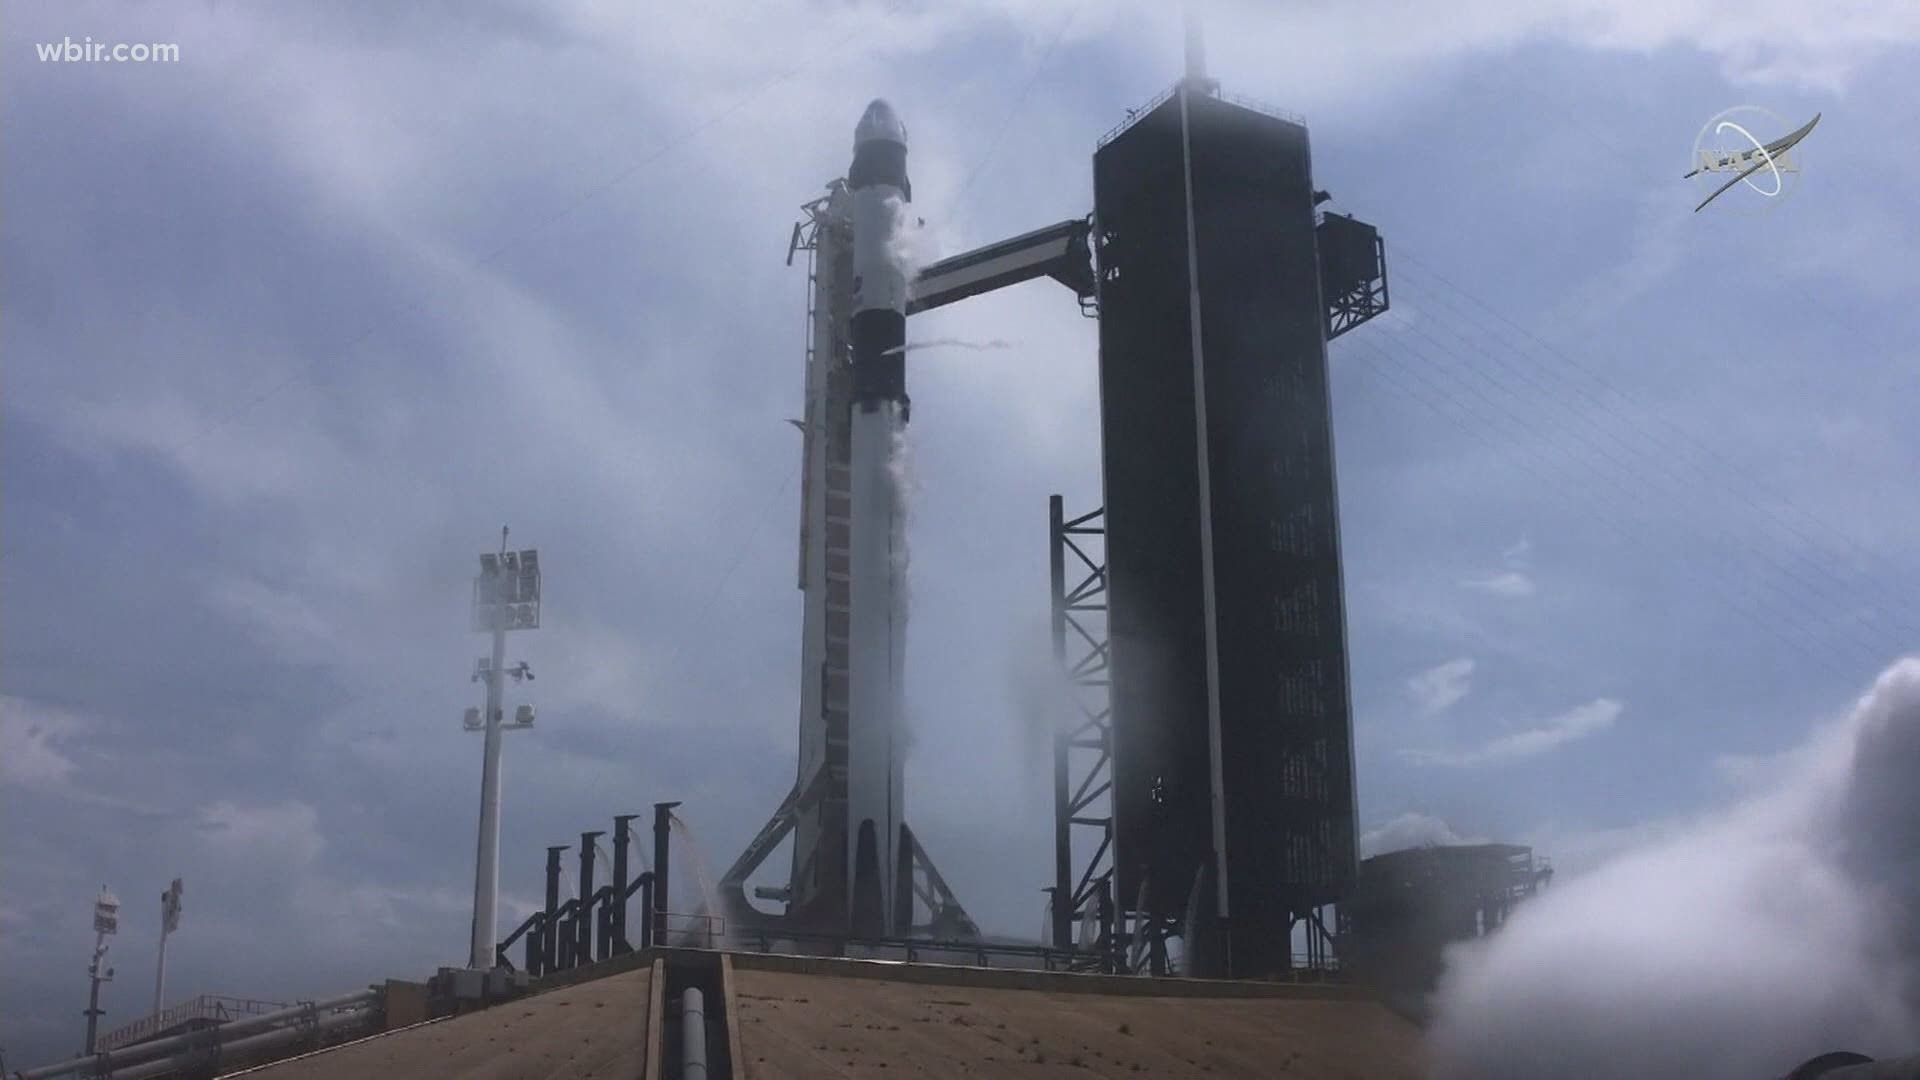 Emily DeVoe spoke to one East Tennessean who helped make sure the launch was successful.